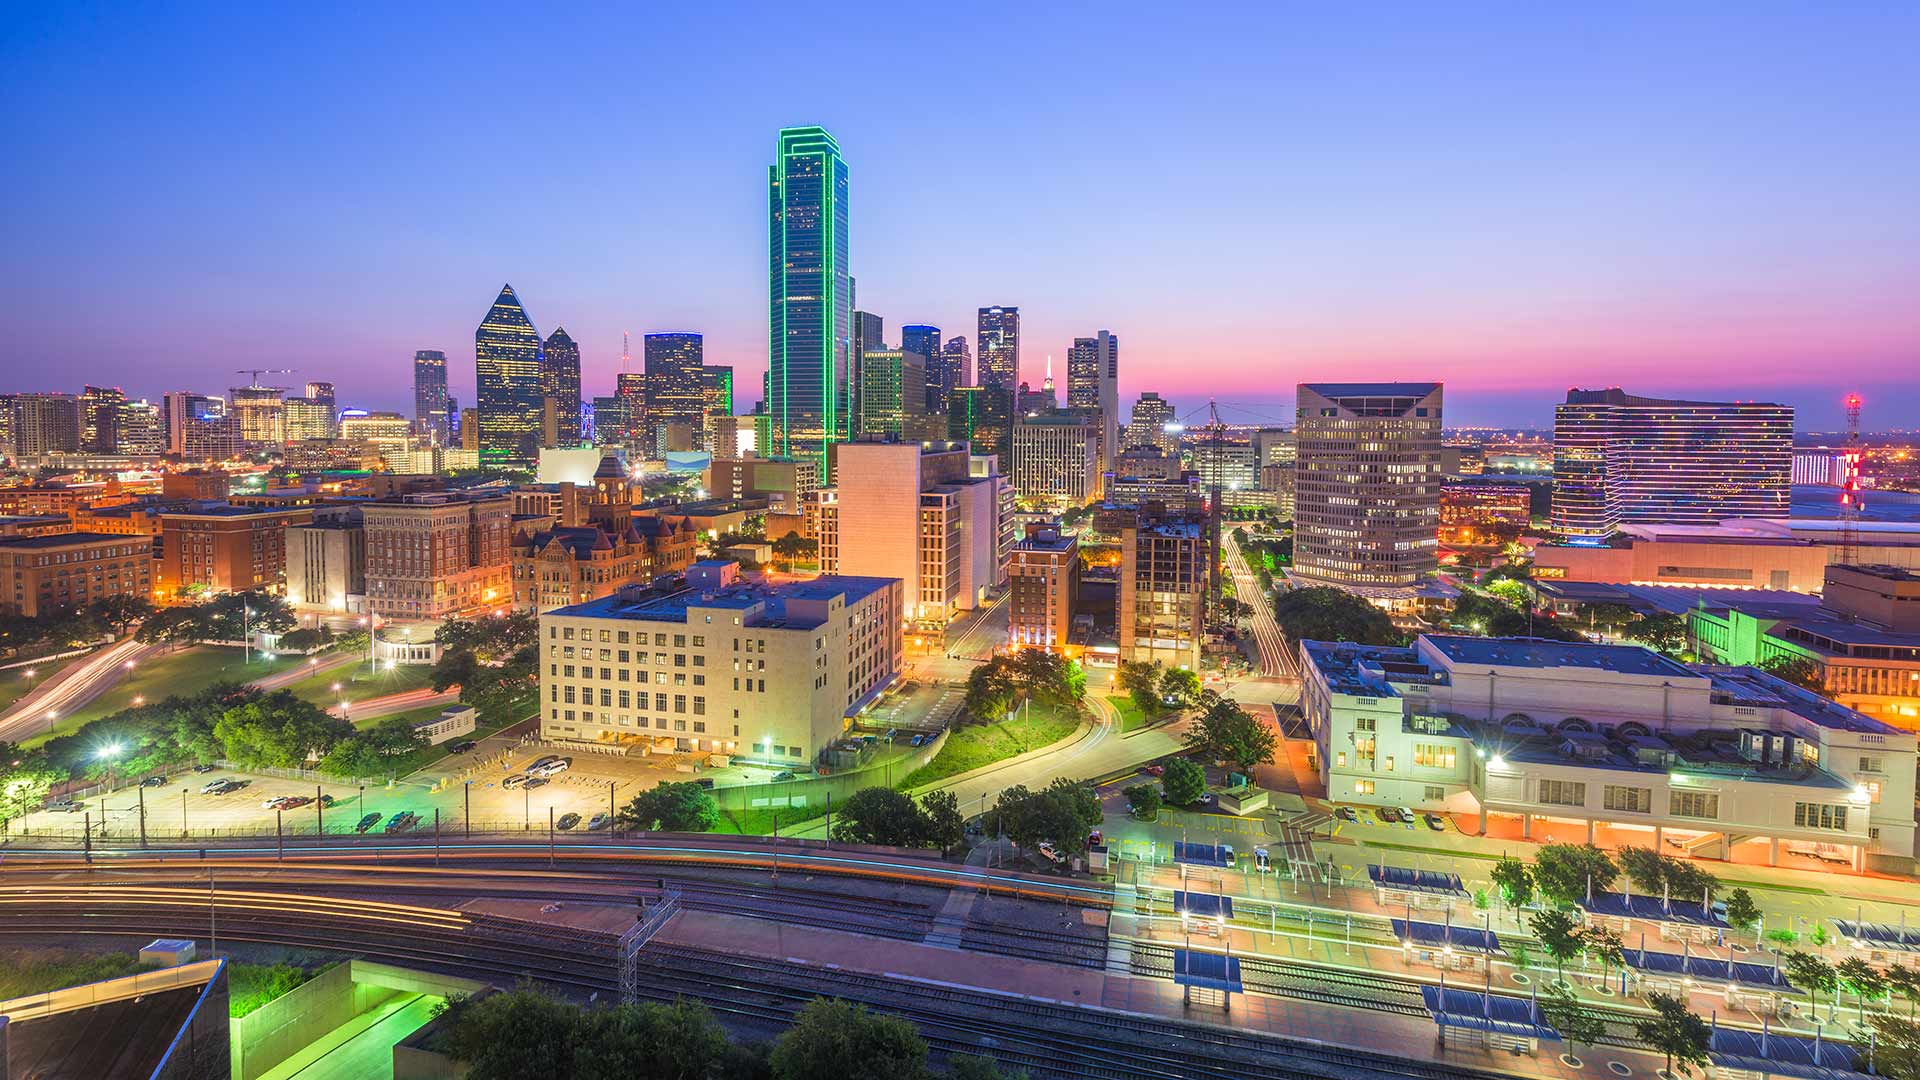 Panorama to illustrate dating in dallas tx